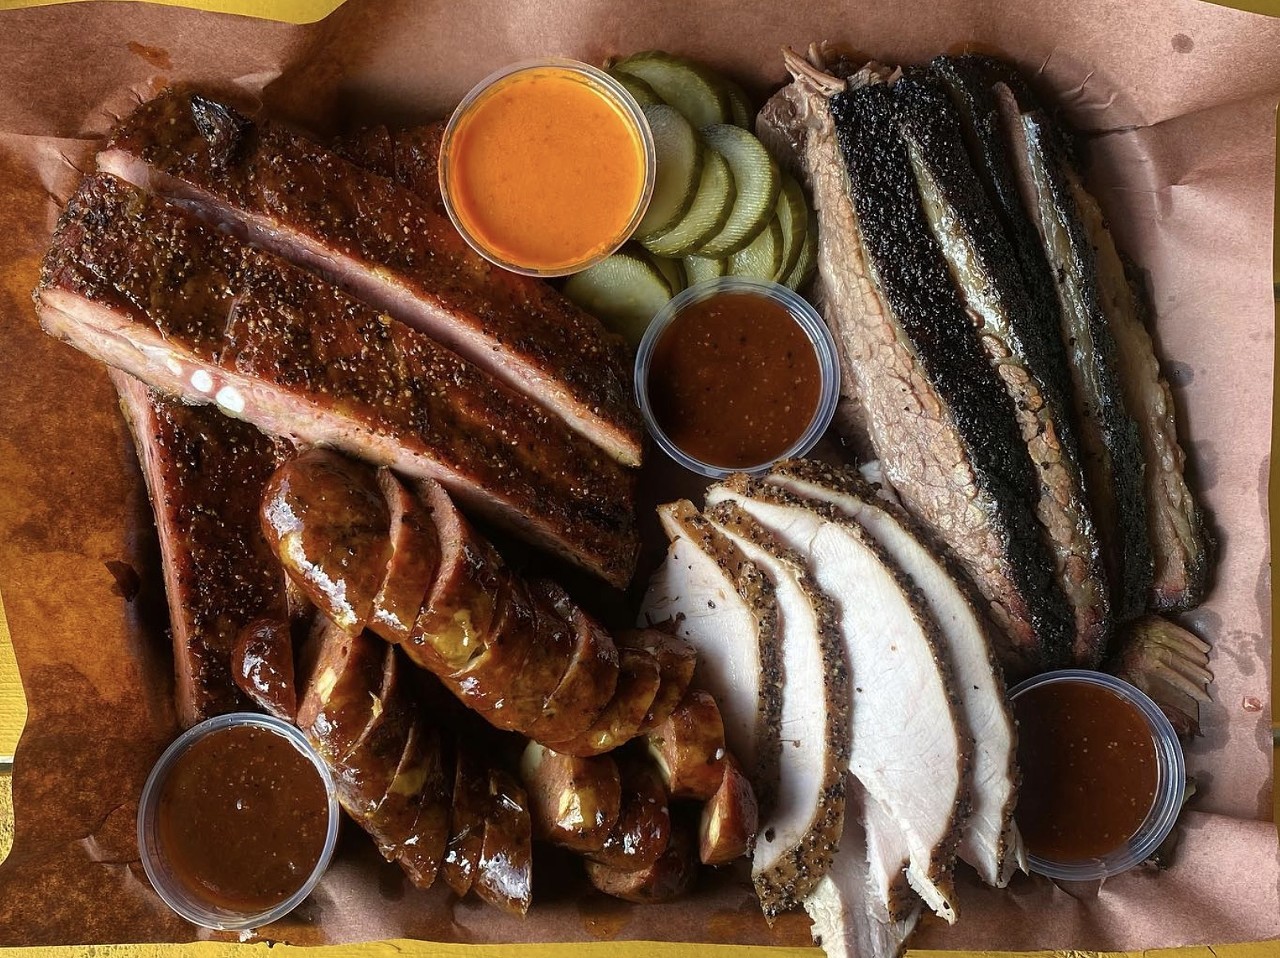 Reese Bros. BBQ
906 Hoefgen Ave., (512) 925-9205, reesebrosbbq.com
After years of serving up barbecue at pop-ups in the south and west parts of the Lone Star State, San Antonio natives Nick and Elliot Reese decided to open a brick and mortar location of Reese Bros in their hometown. The brothers are known for their famous sausage, turkey, ribs and 14-hour smoked brisket.